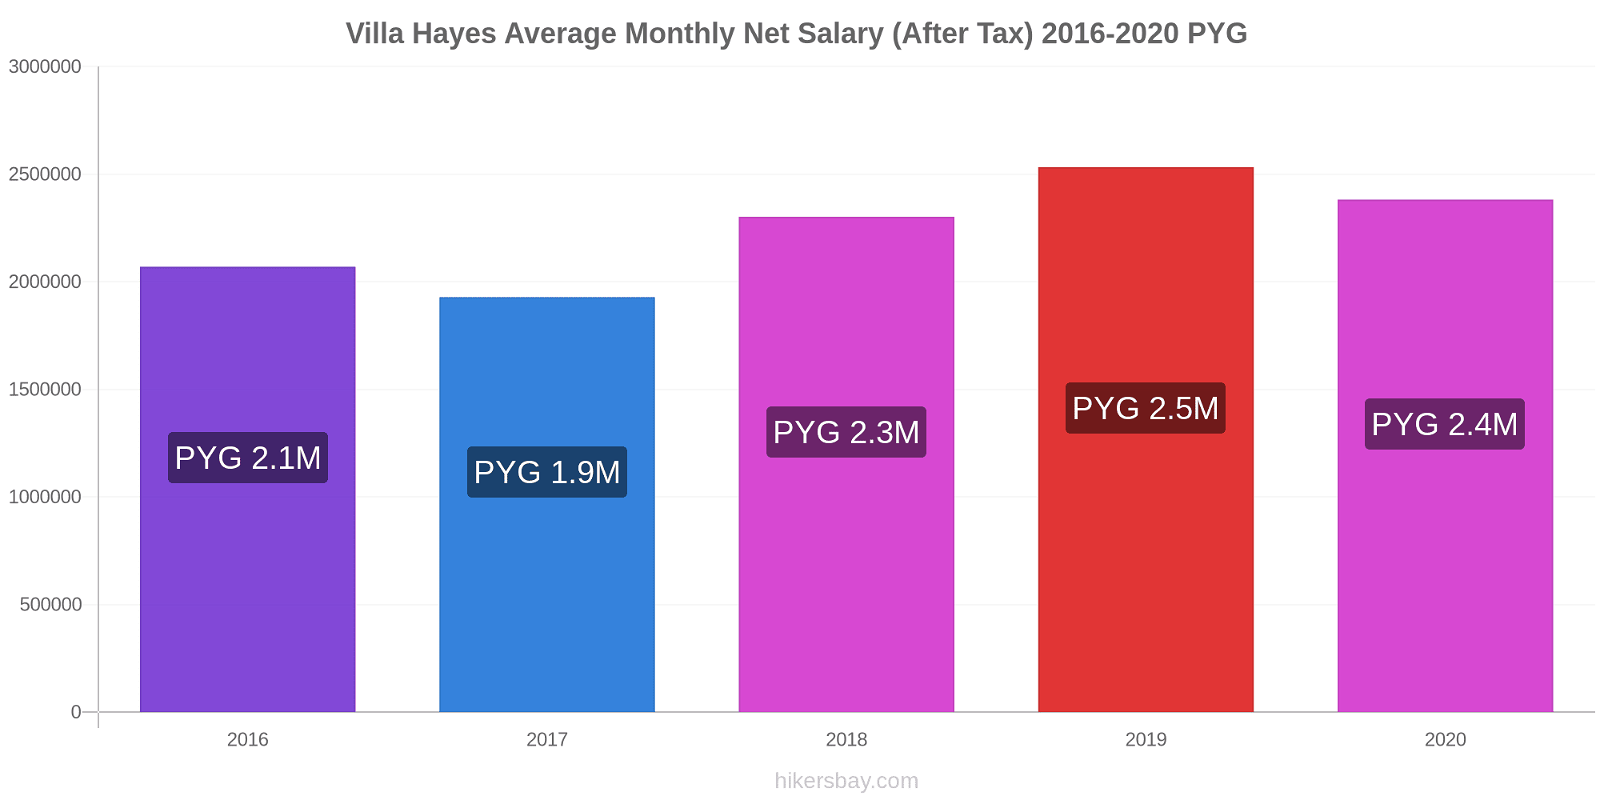 Villa Hayes price changes Average Monthly Net Salary (After Tax) hikersbay.com